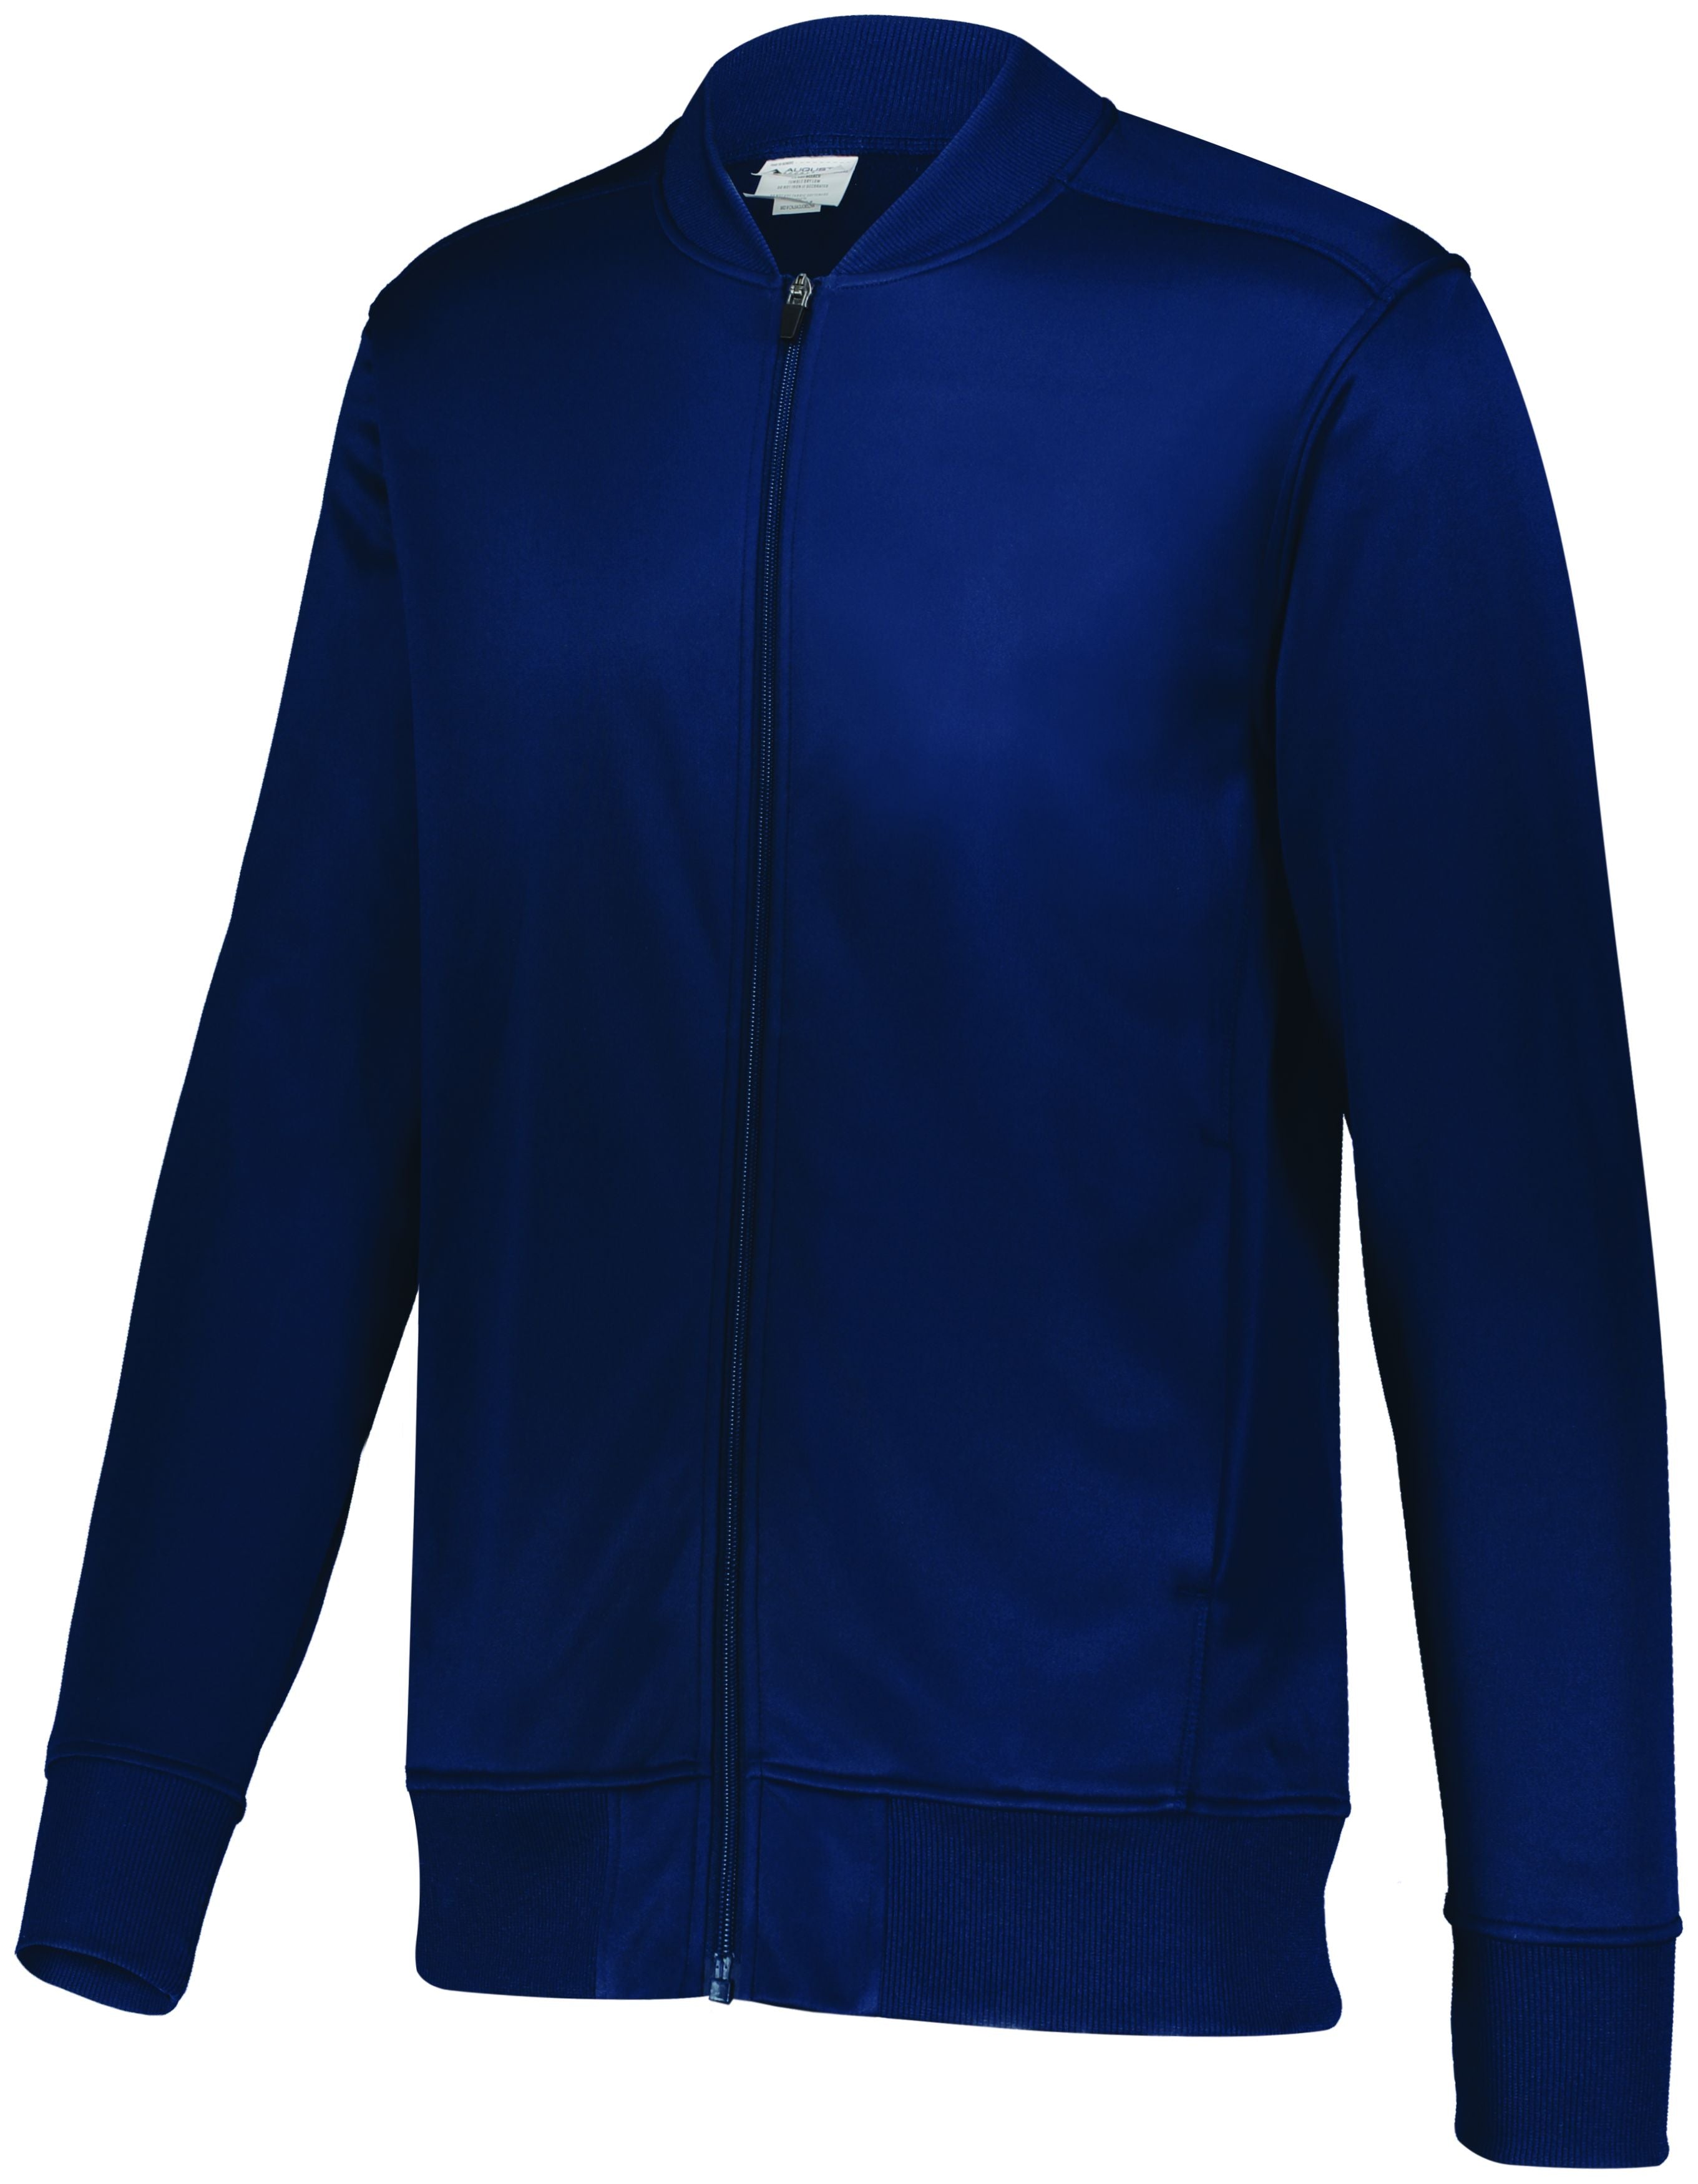 Augusta Sportswear Trainer Jacket in Navy  -Part of the Adult, Adult-Jacket, Augusta-Products, Outerwear product lines at KanaleyCreations.com